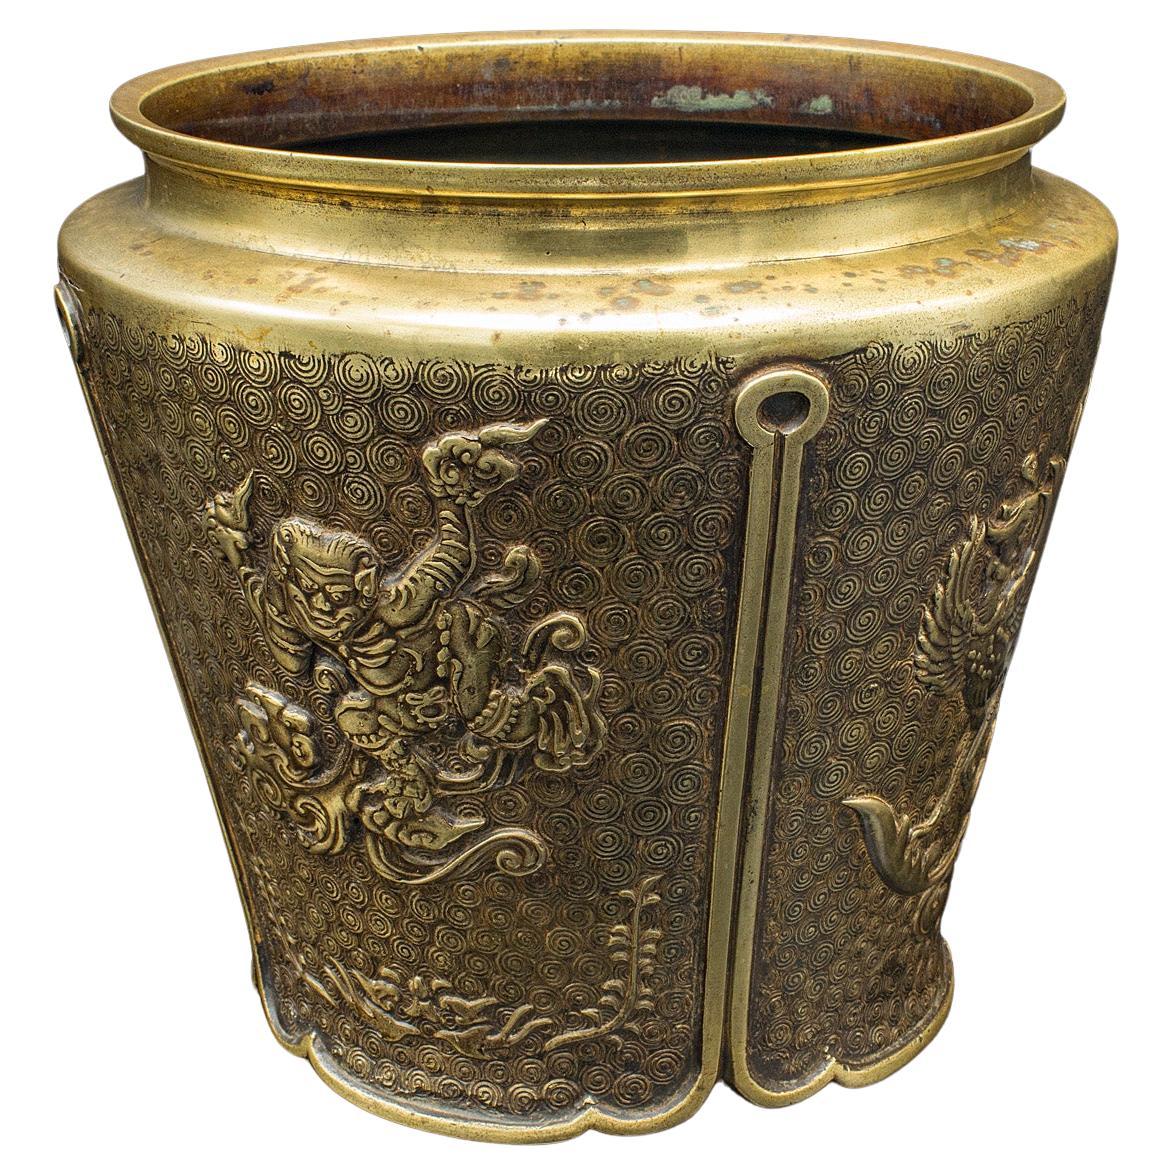 Antique Decorative Planter, Chinese, Bronze, Jardiniere, Qing Dynasty, Victorian For Sale